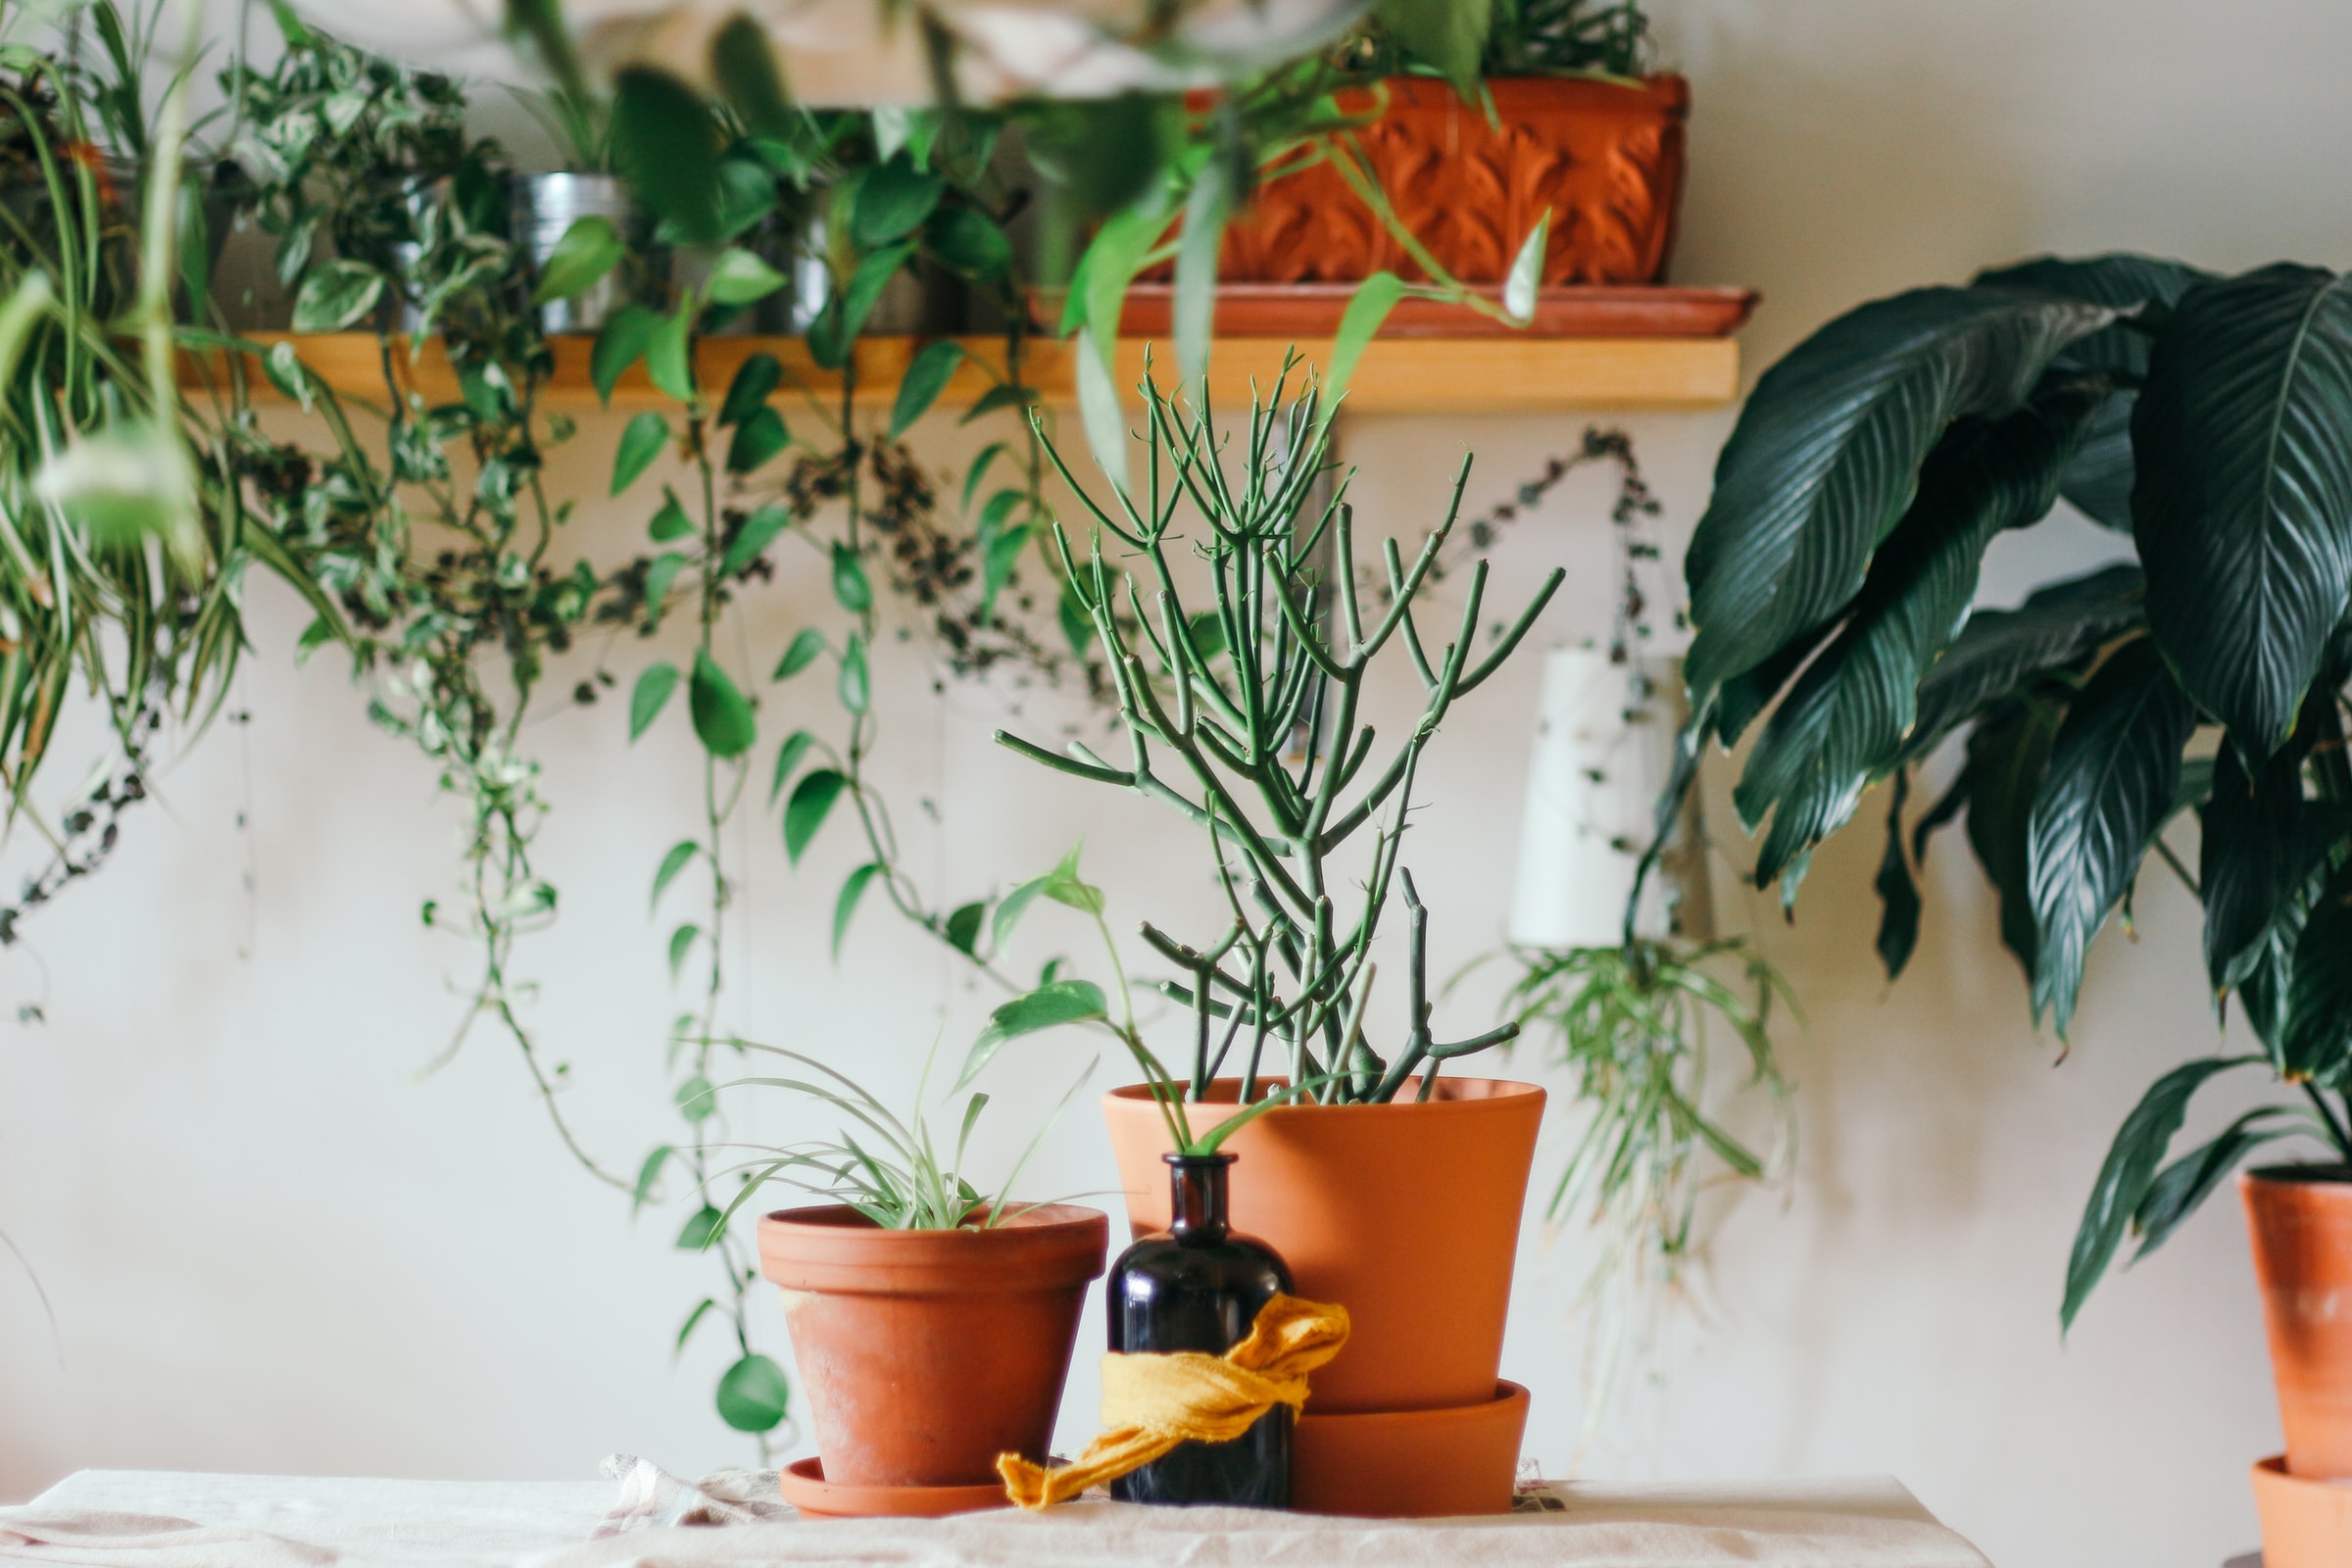 Plant Therapy: Why an Indoor Green Oasis Can Improve Your Mental and Emotional Wellbeing [Book]